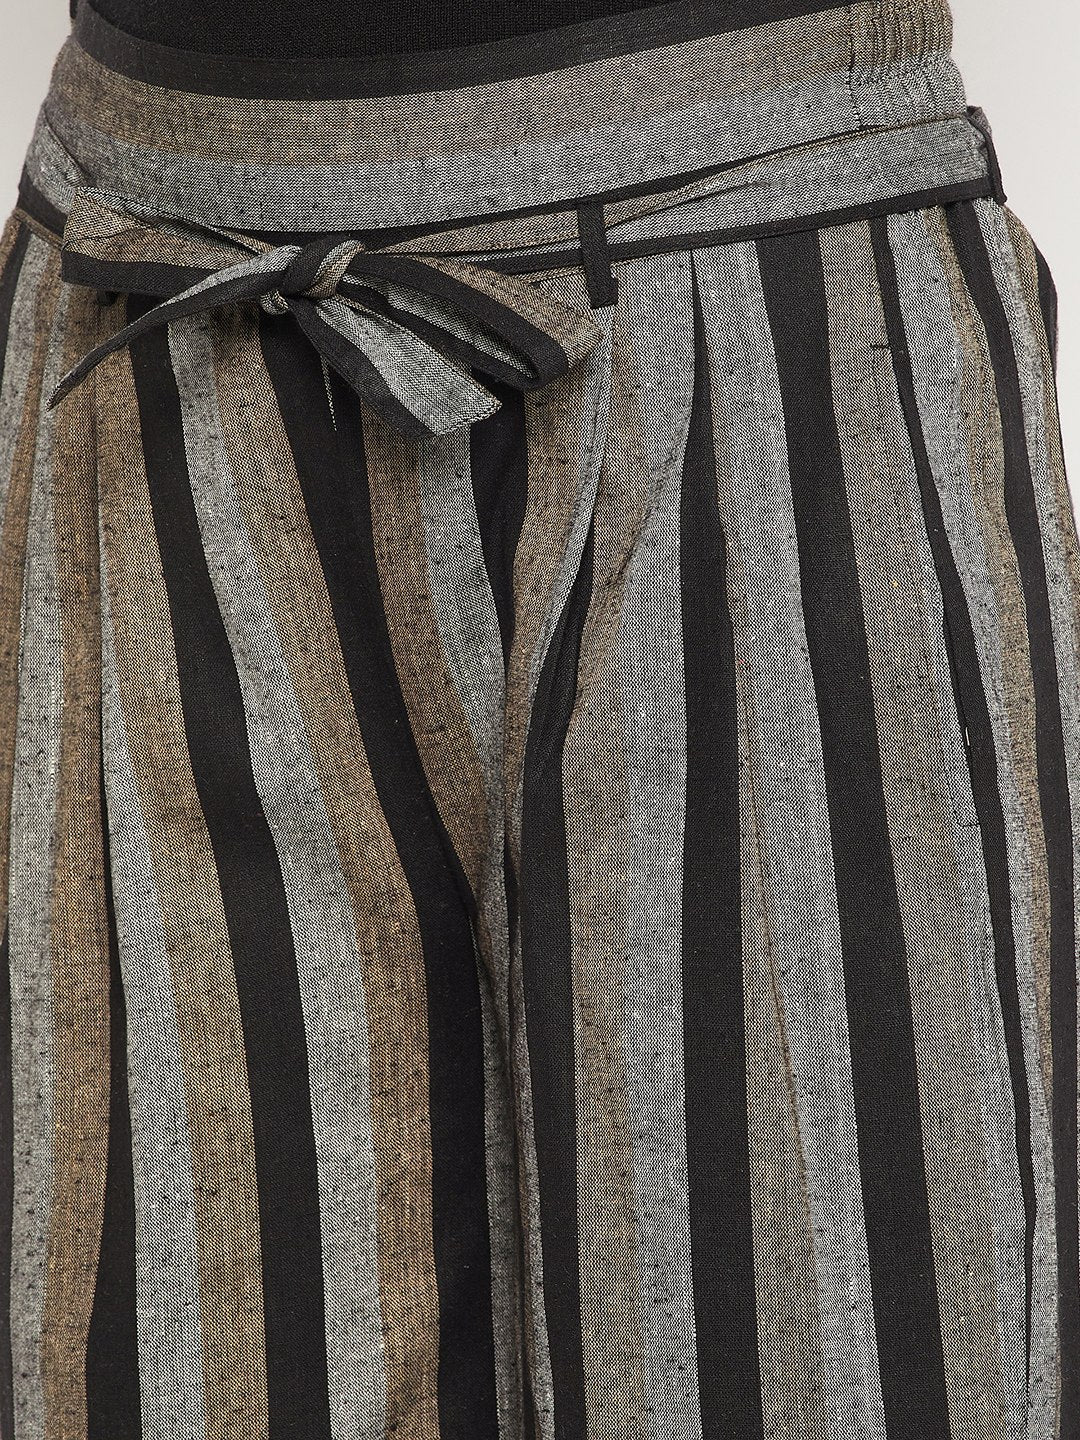 Women Striped Relaxed Flared Wrinkle Free Pleated Cotton Culottes